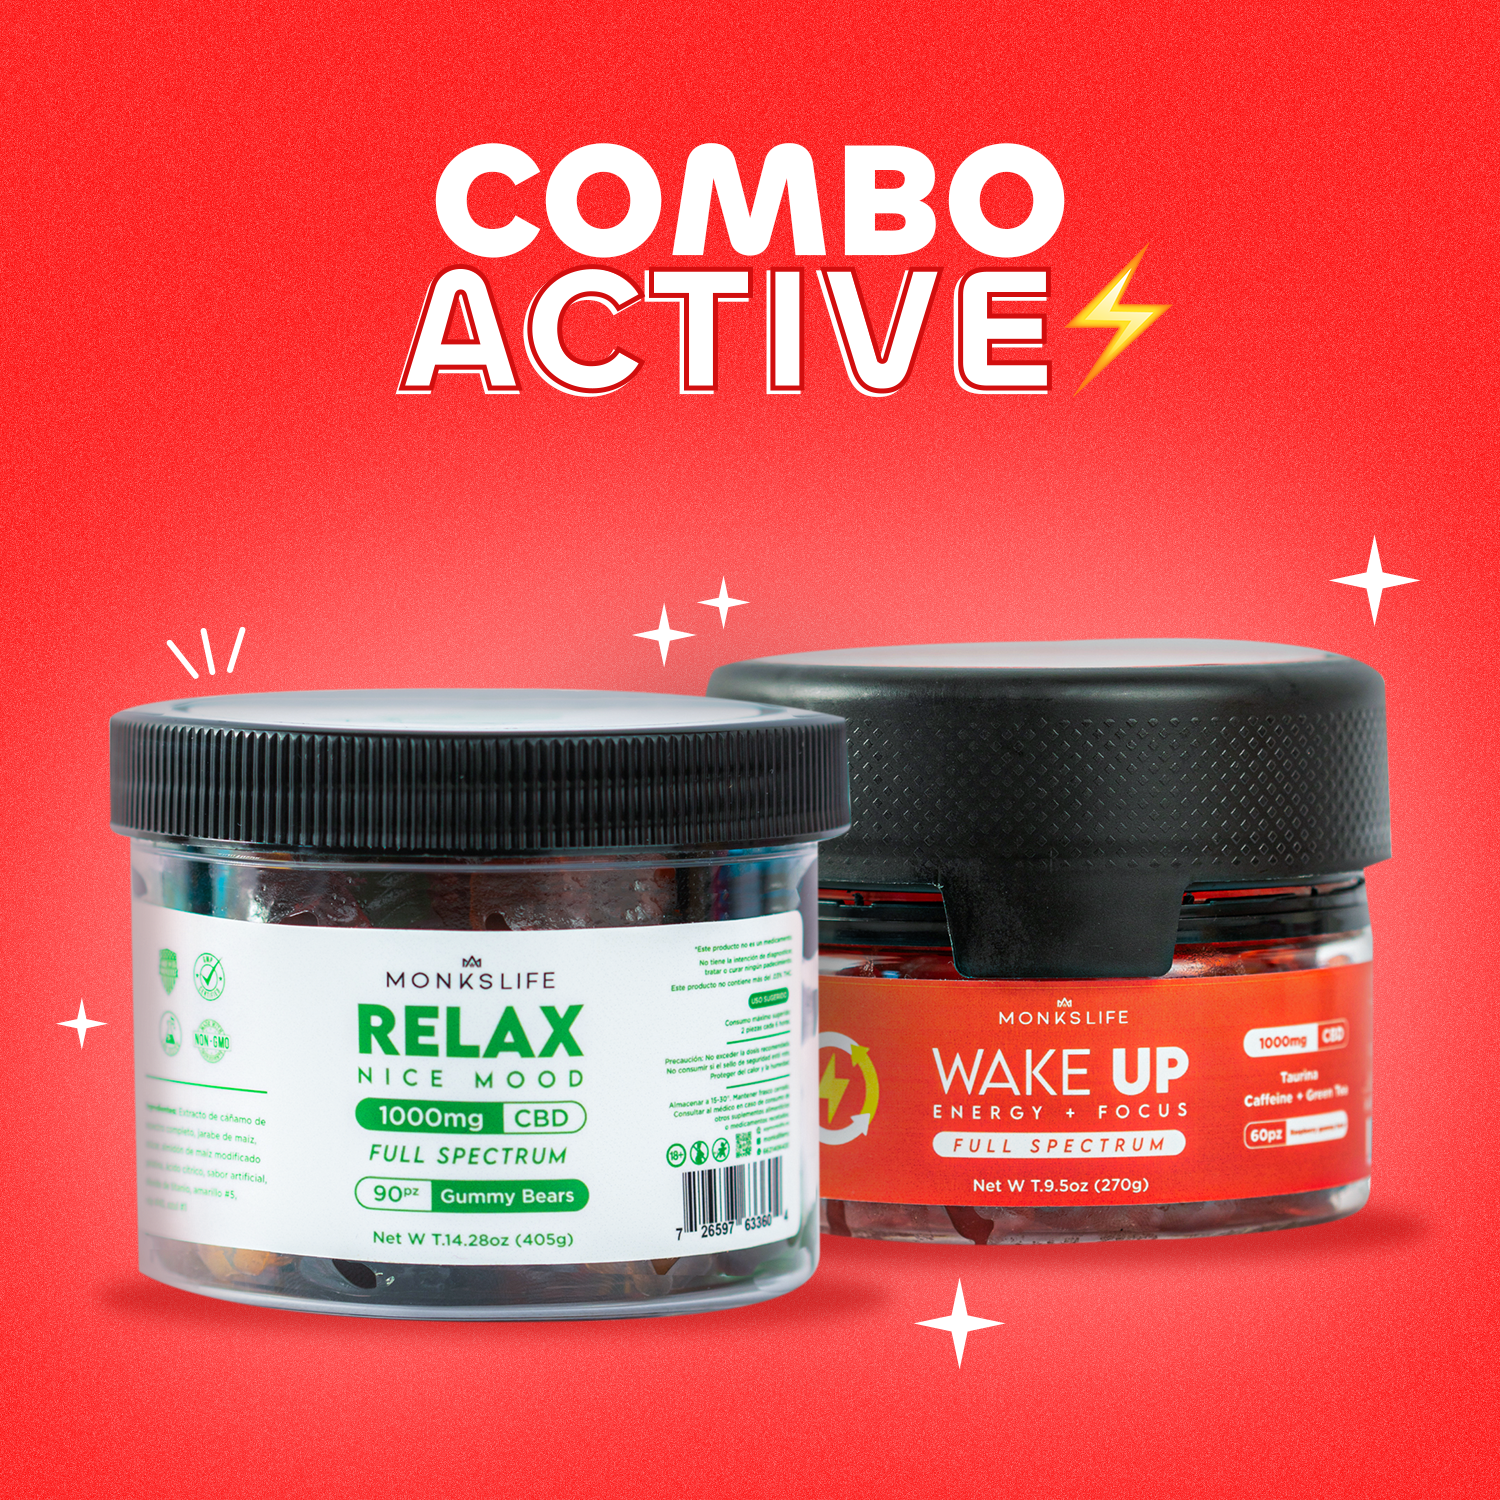 COMBO ACTIVE